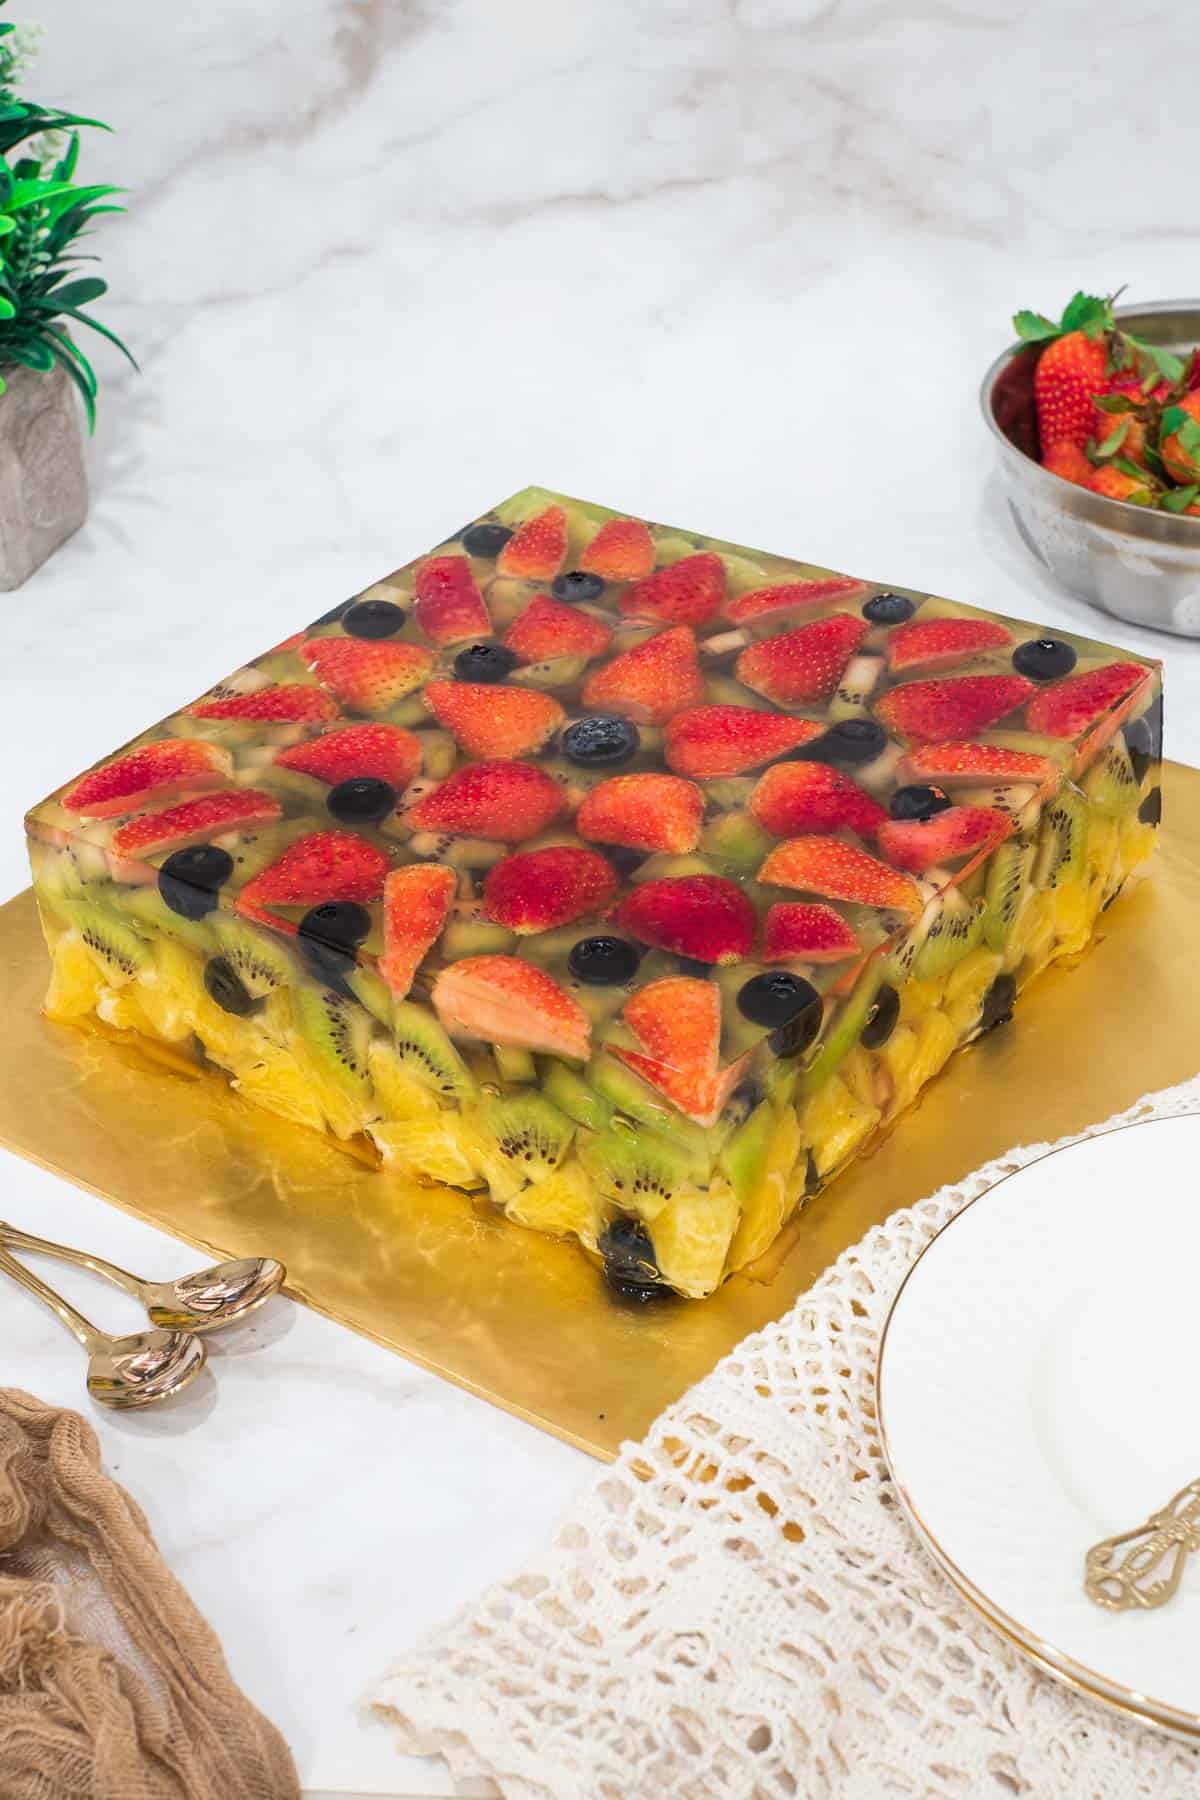 A square cake made of fruits and jelly on a gold cake board.